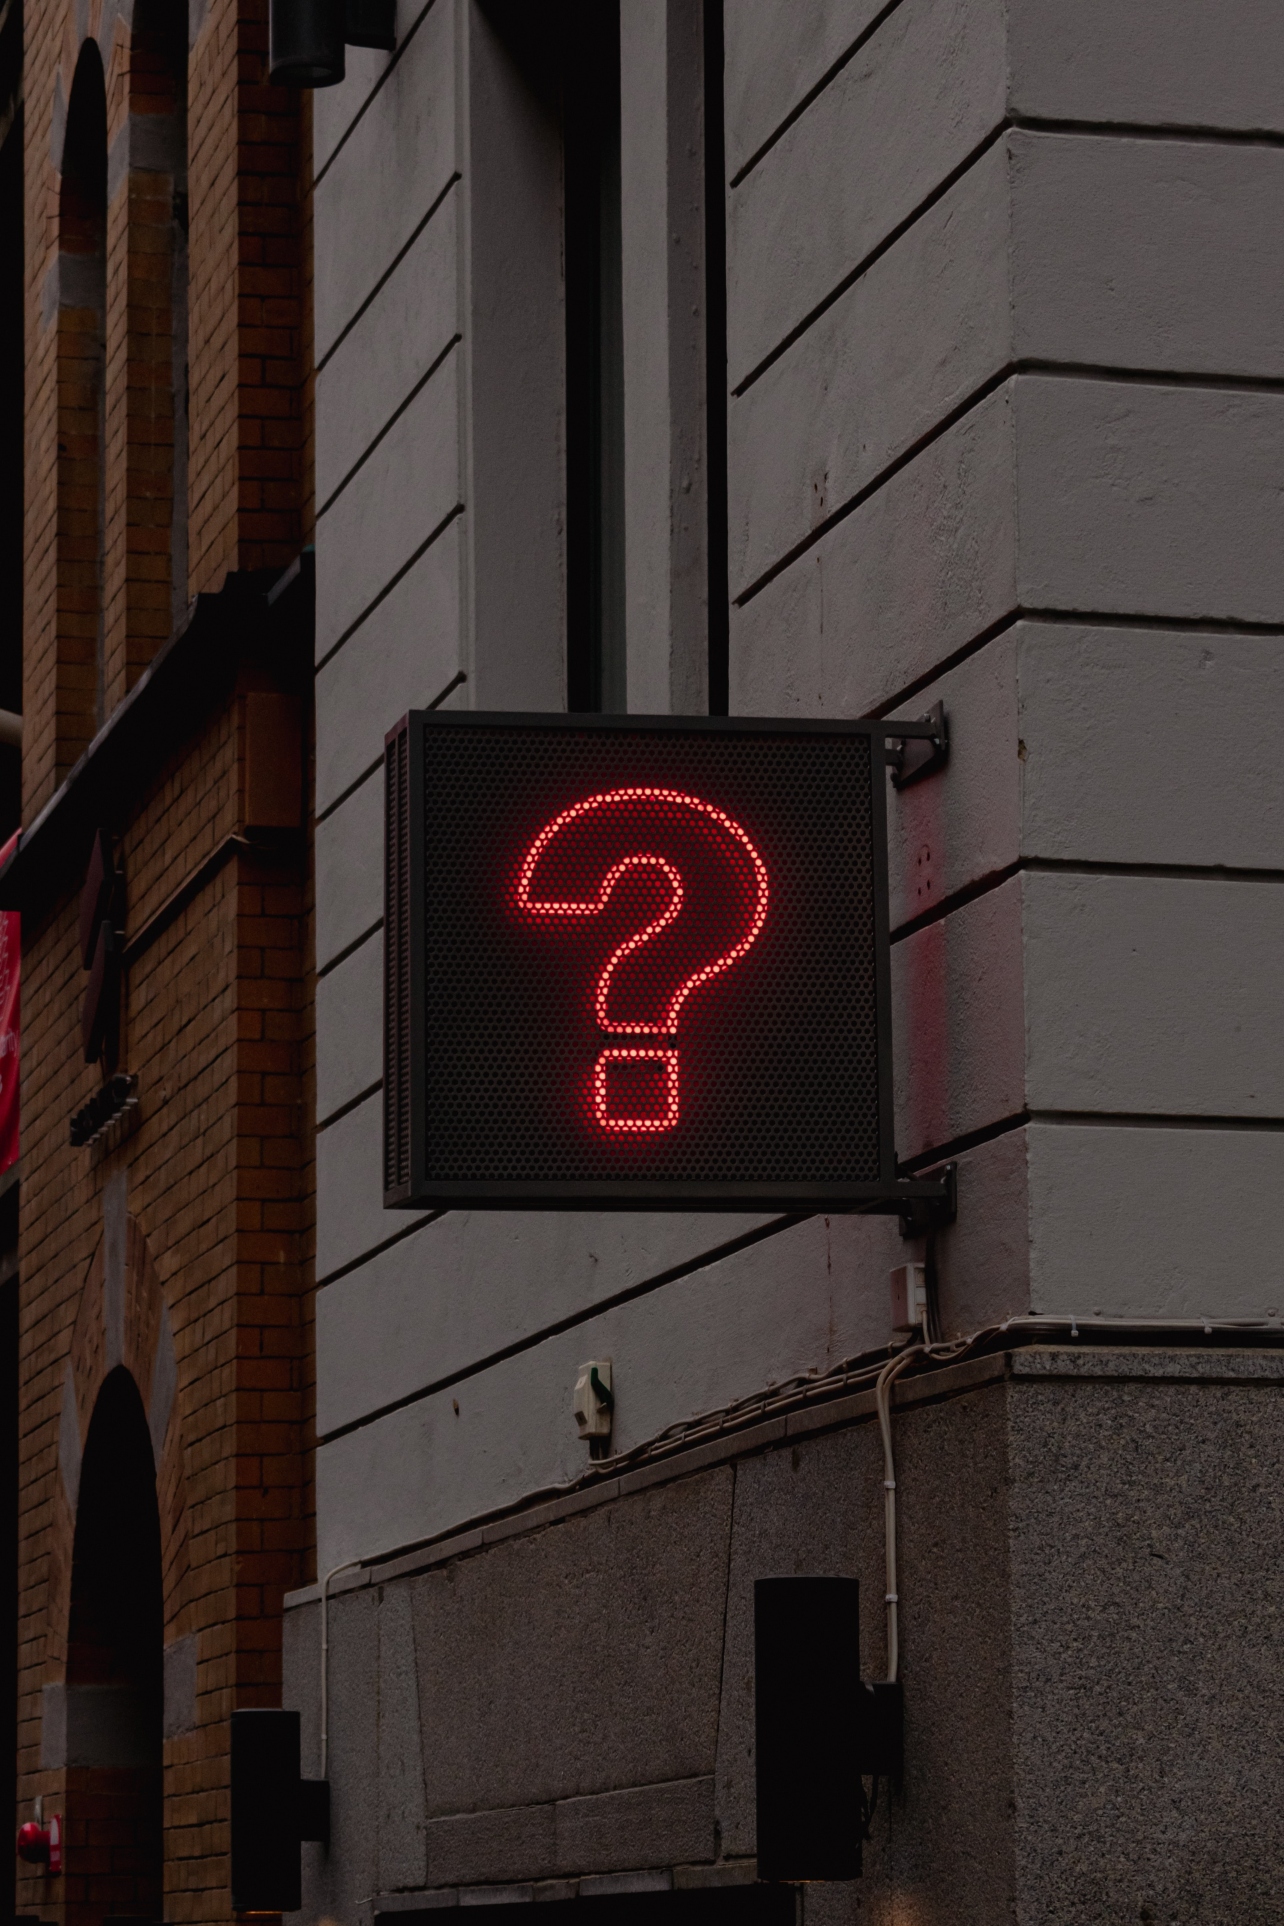 Neon Question Mark Sign in Darkened Street for the Digital Marketing in Plain English - Your Most Asked Questions Blog Post